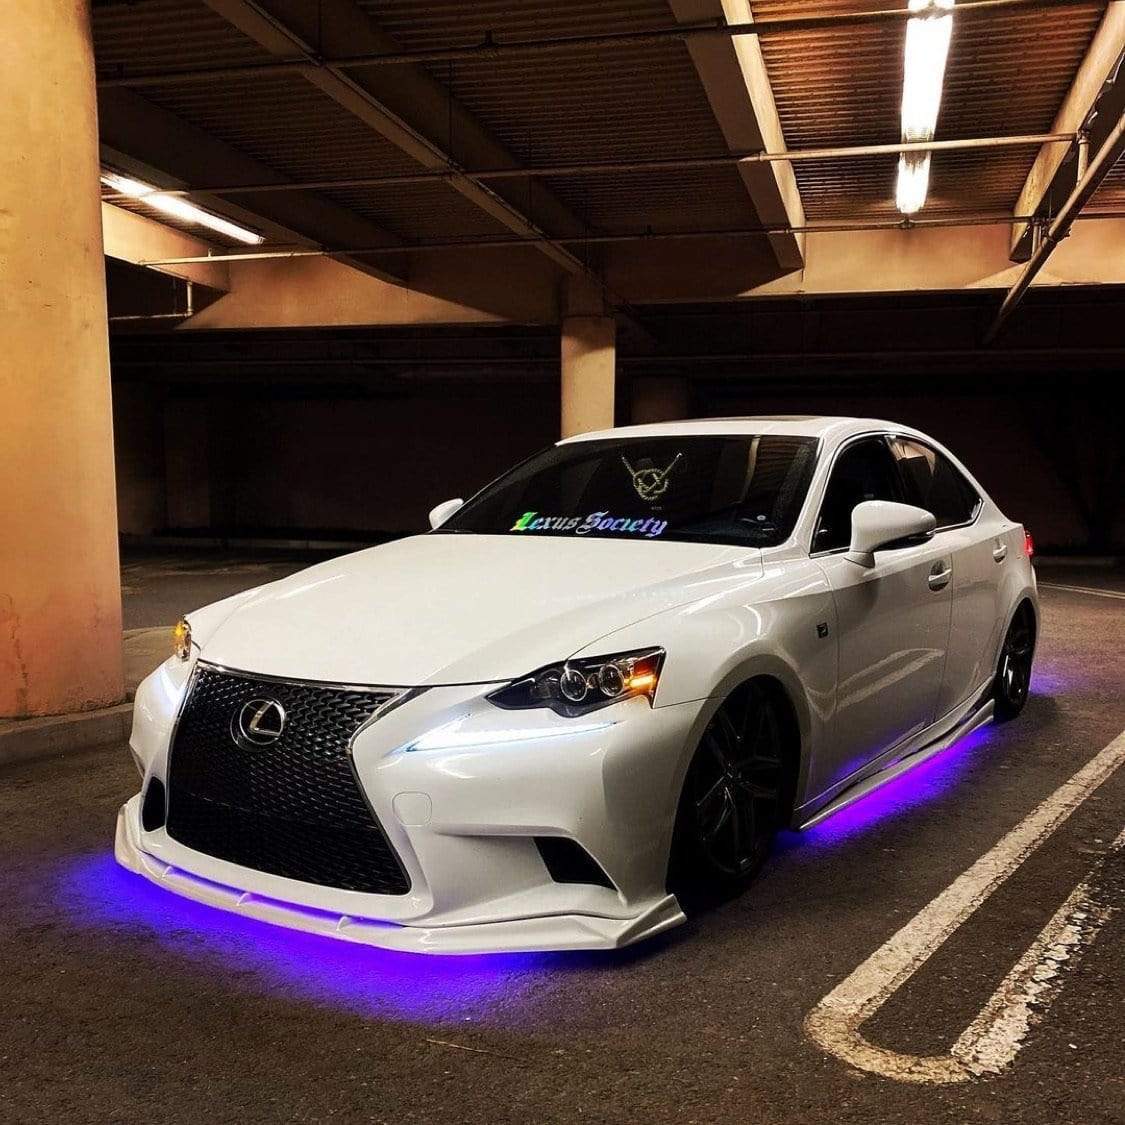 LED Underglow Replacement Strips - RGB Halo Kits Multicolor Flow Series Color Chasing RGBWA LED headlight kit Oracle Lighting Trendz OneUpLighting Morimoto theretrofitsource AutoLEDTech Diode Dynamics